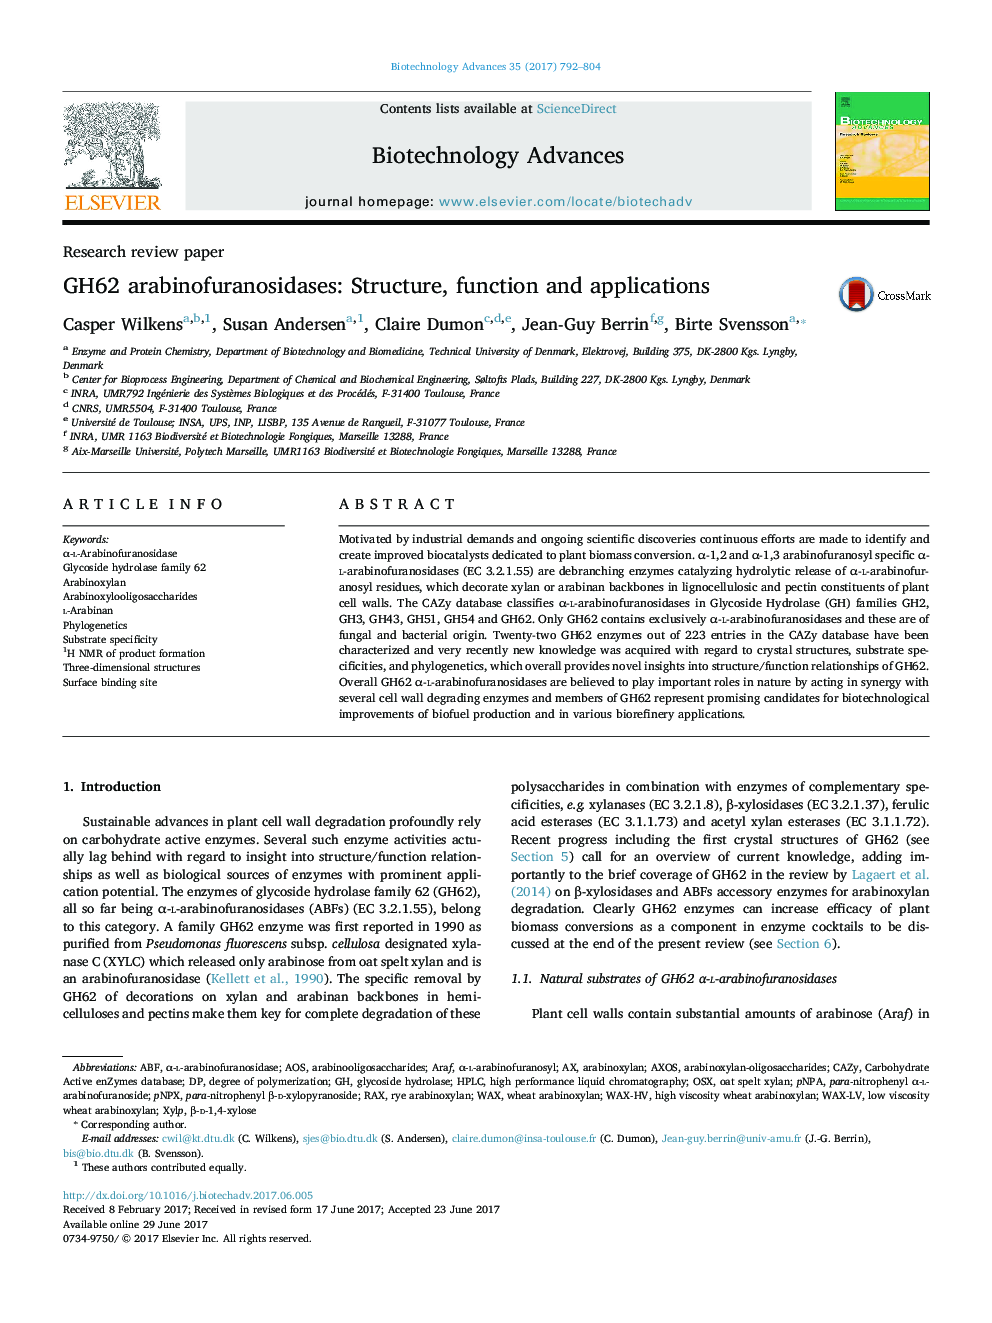 Research review paperGH62 arabinofuranosidases: Structure, function and applications